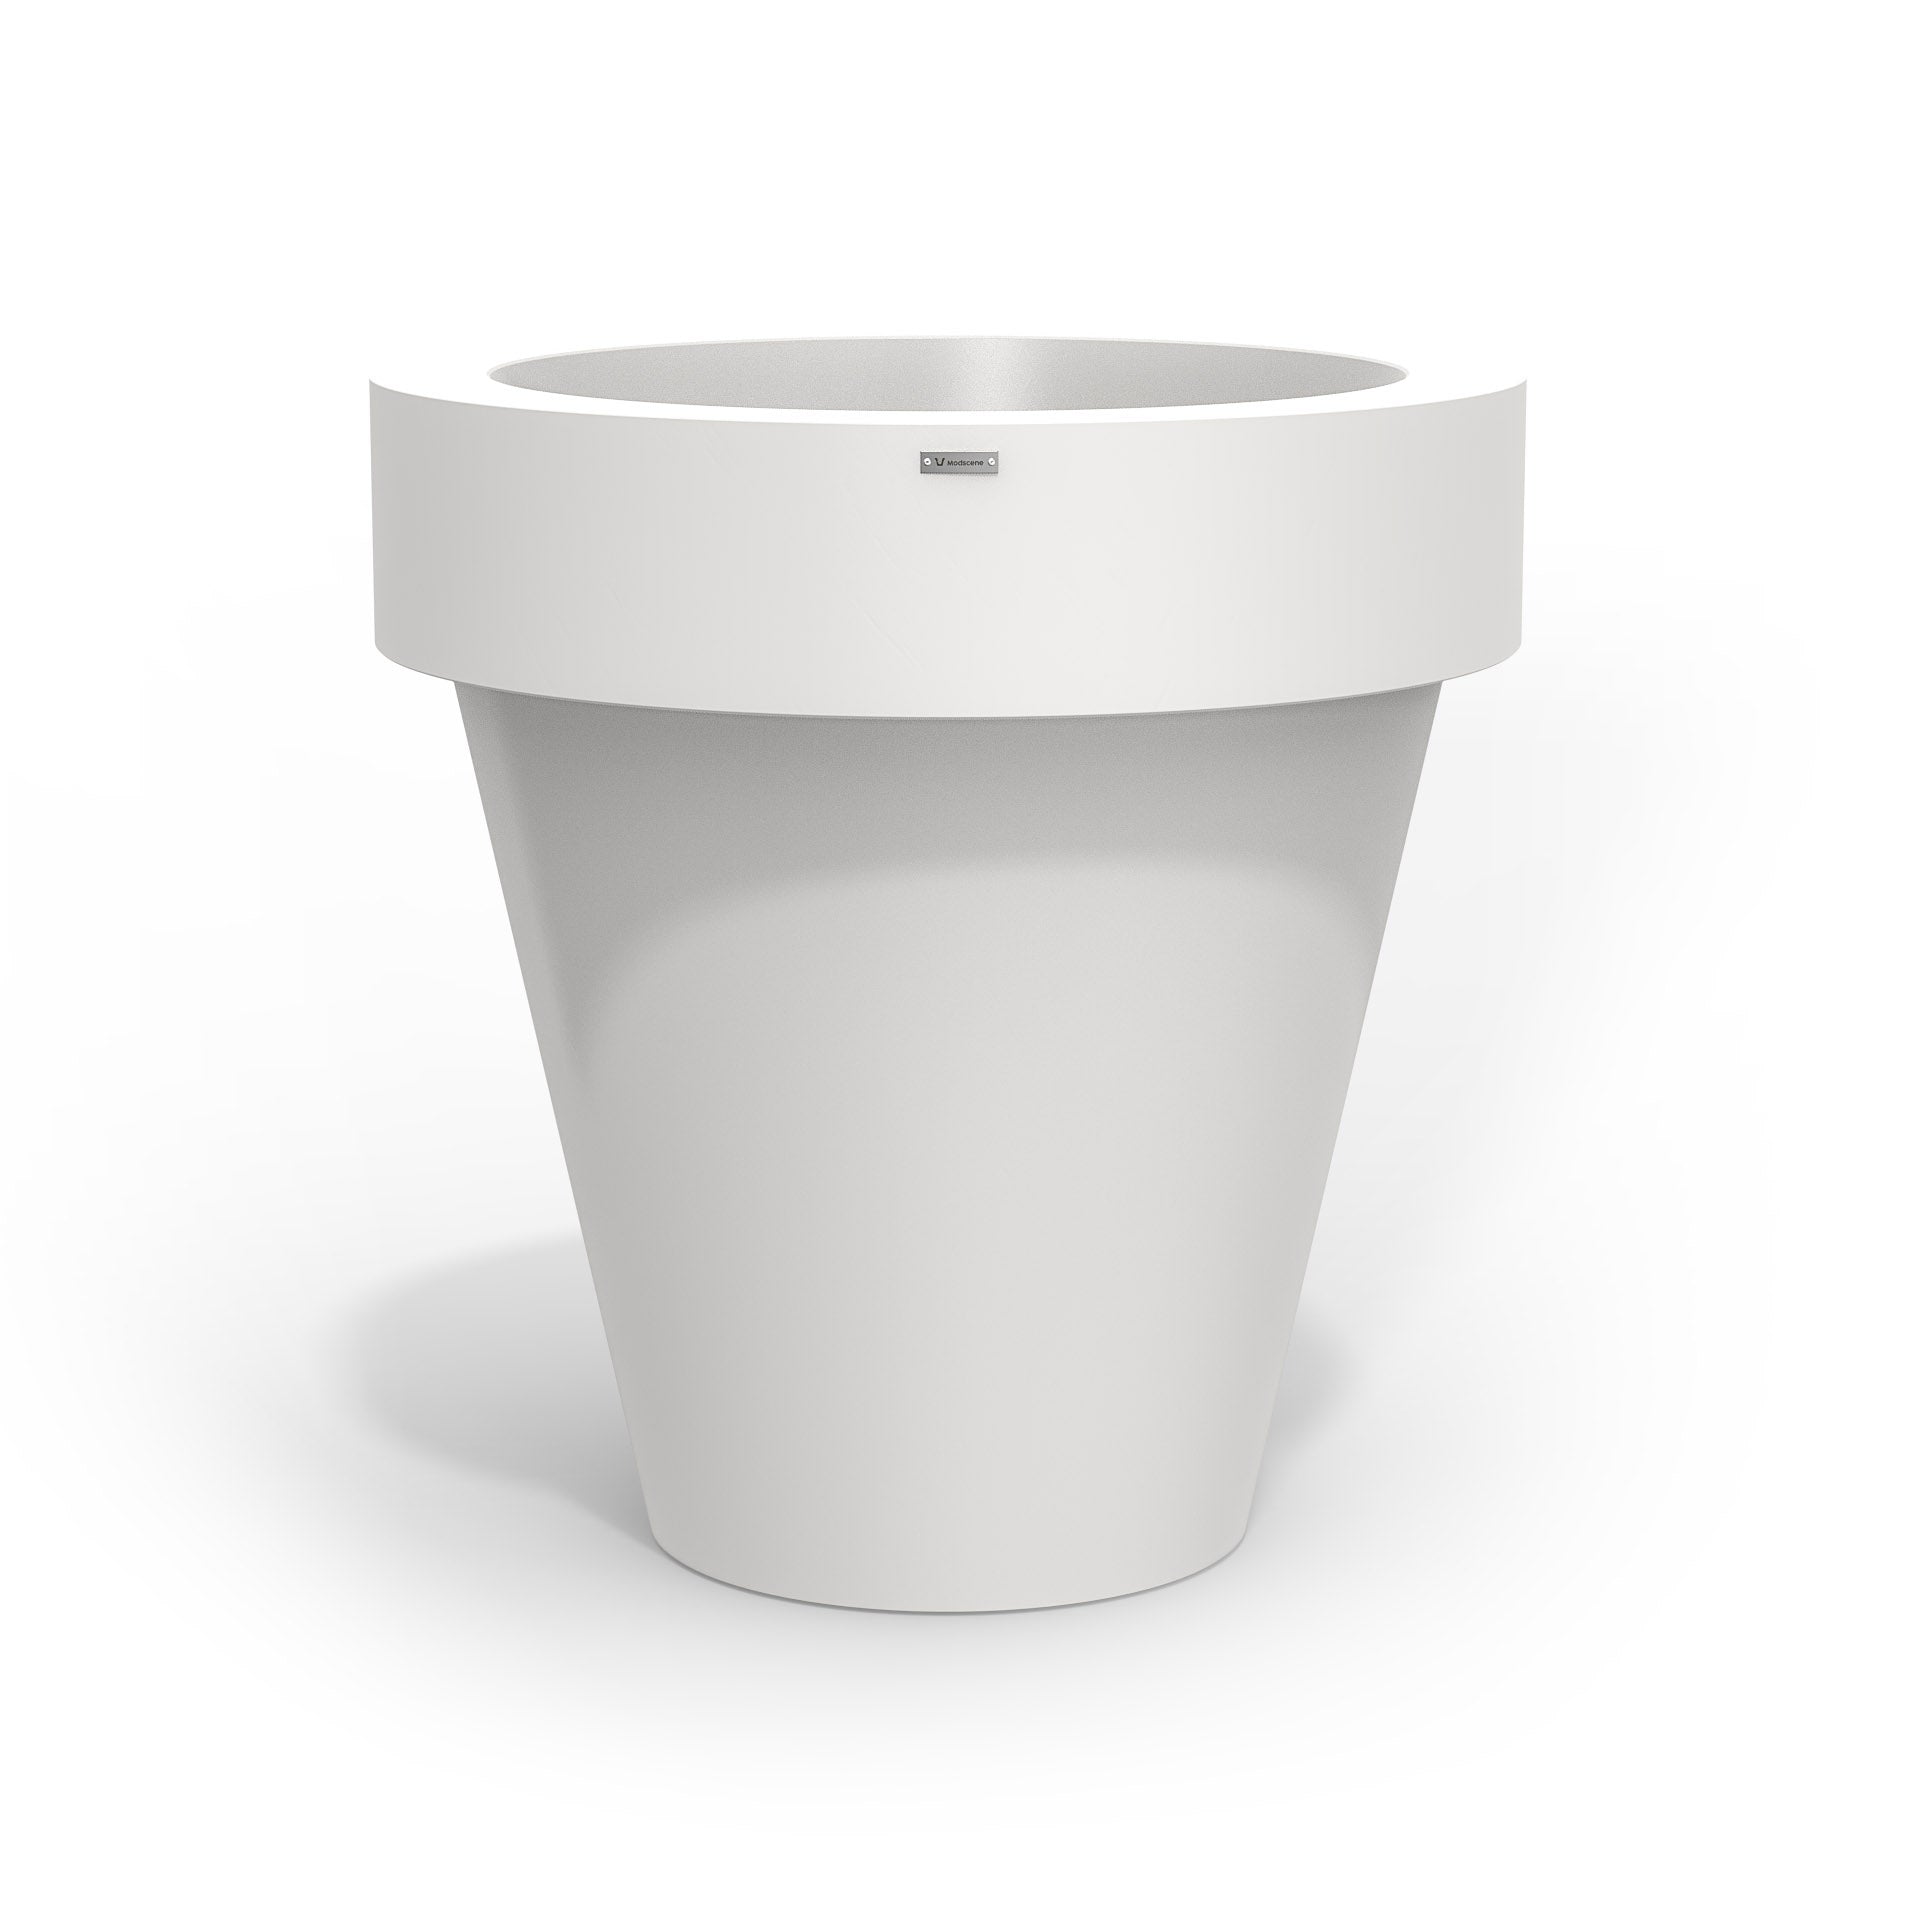 A white Modscene planter pot in a extra large size. Made in NZ.